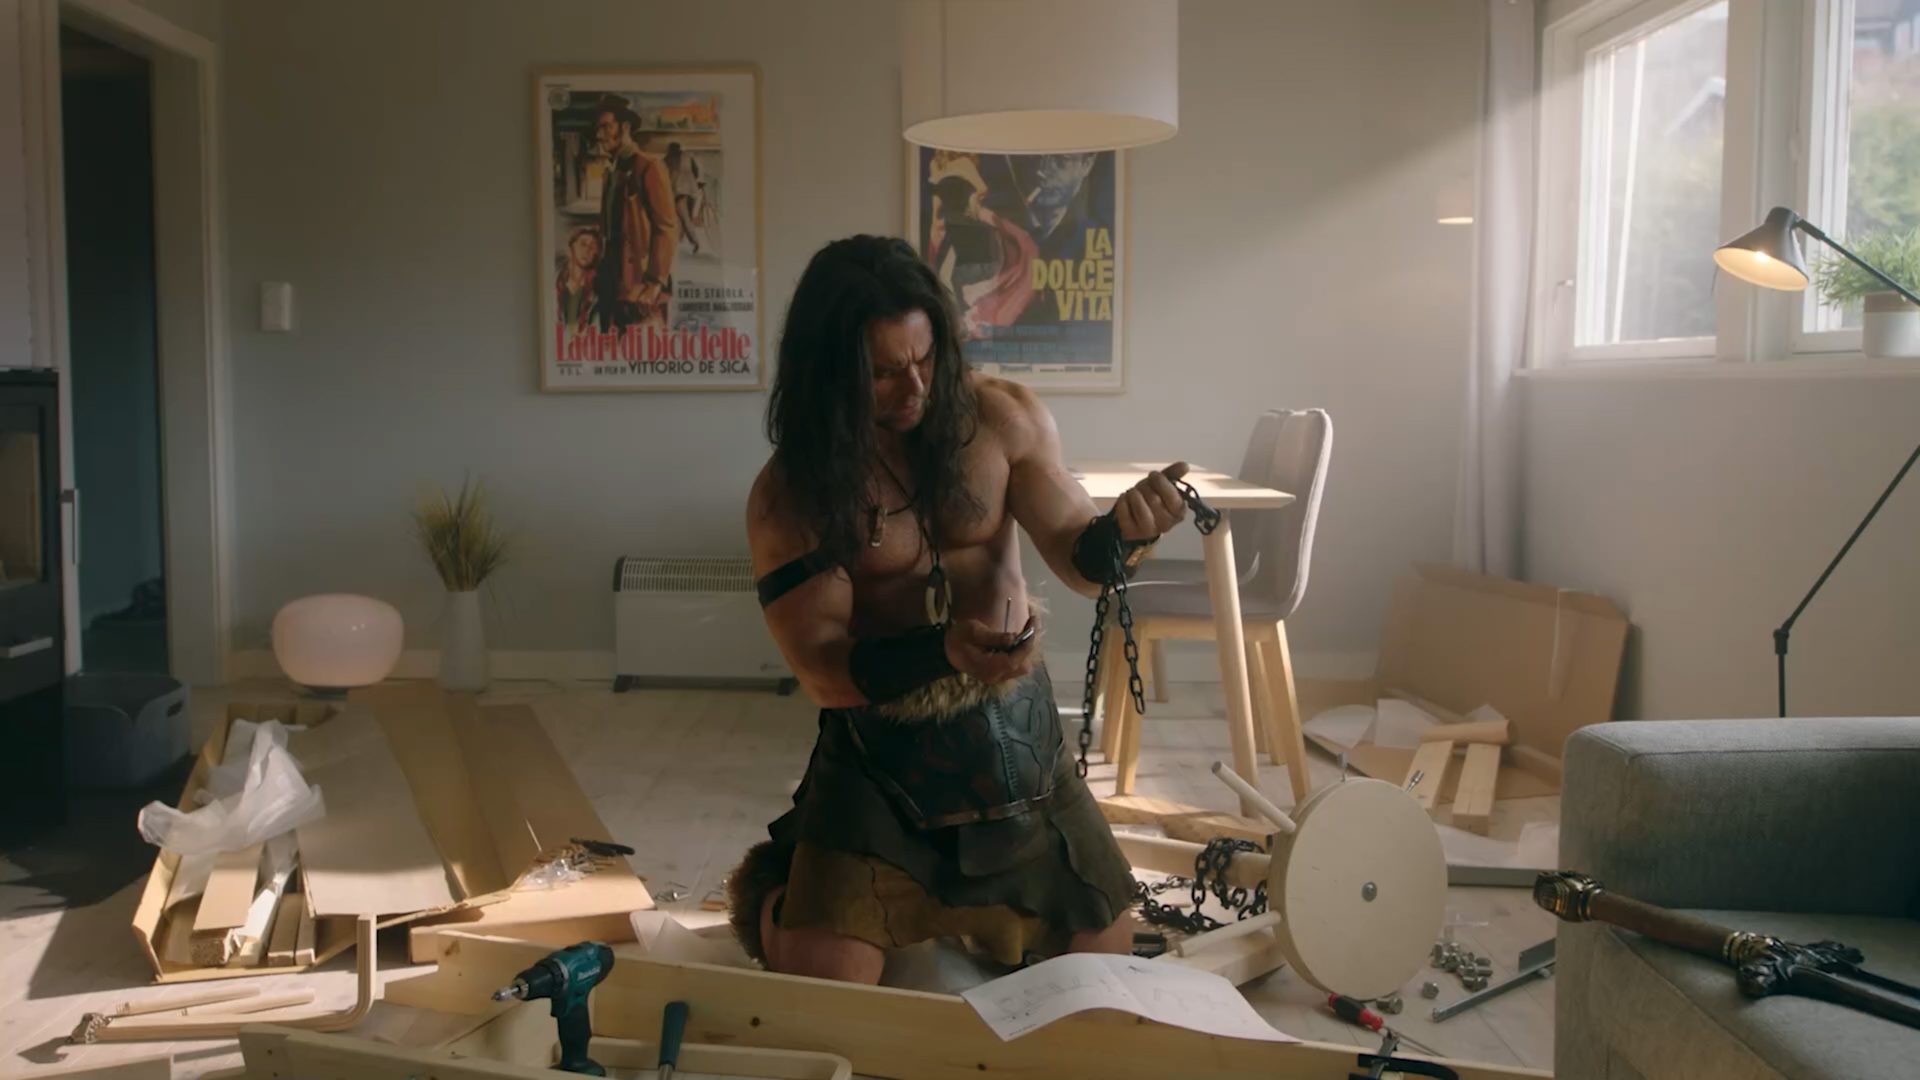 A real-life Conan the Barbarian attempting to assemble an IKEA torture device